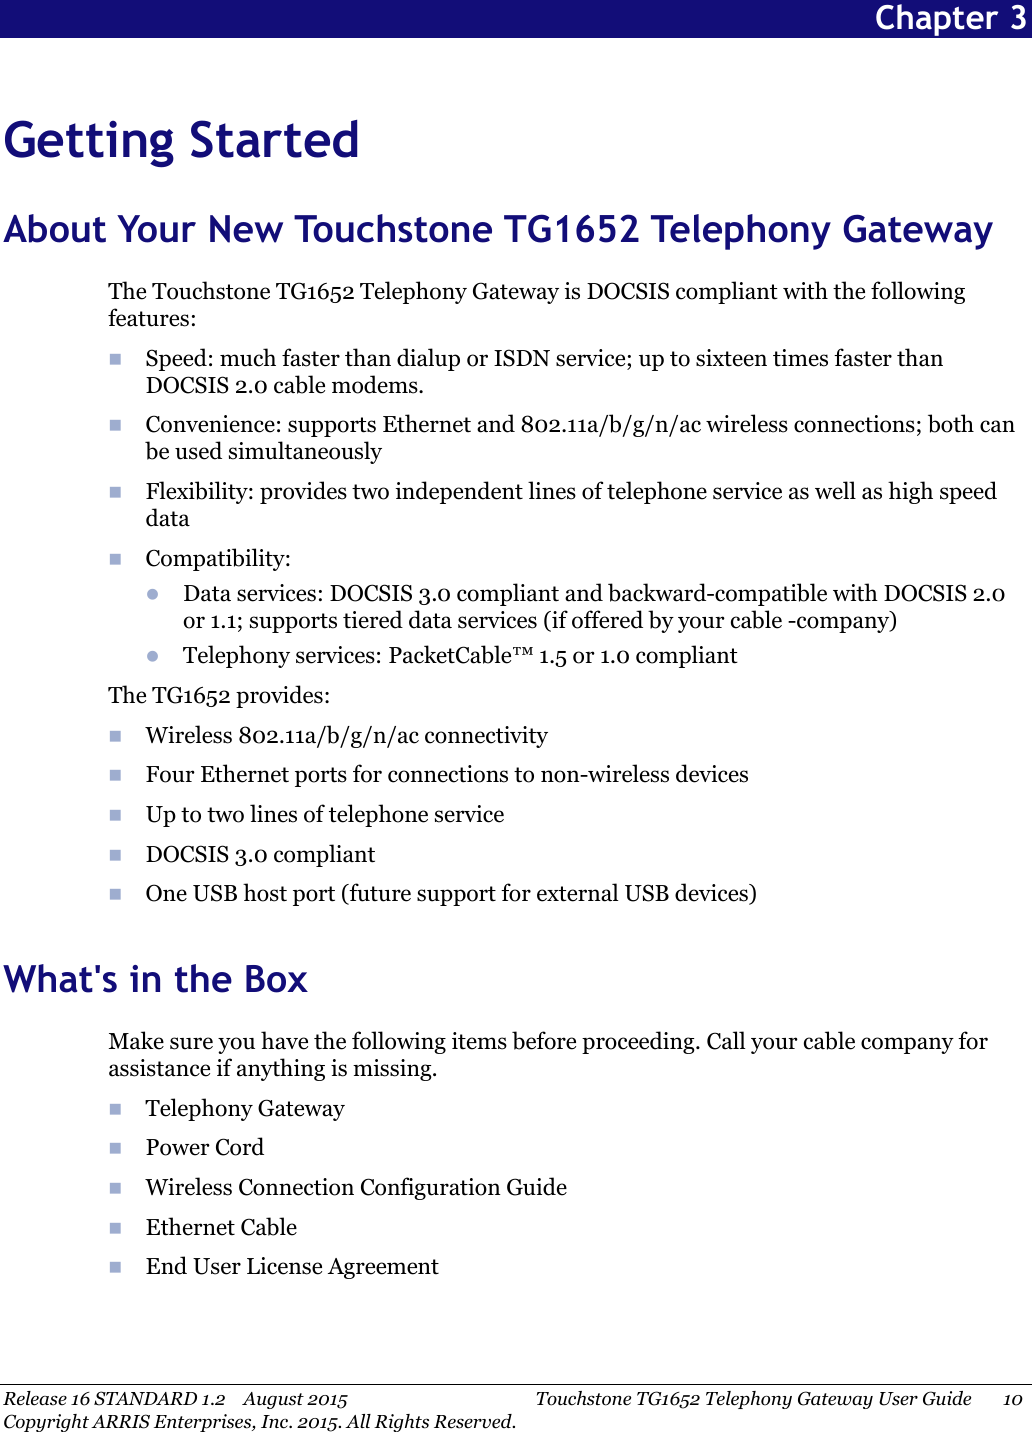 Release 16 STANDARD 1.2 August 2015 Touchstone TG1652 Telephony Gateway User Guide 10Copyright ARRIS Enterprises, Inc. 2015. All Rights Reserved.Chapter 3Getting StartedAbout Your New Touchstone TG1652 Telephony GatewayThe Touchstone TG1652 Telephony Gateway is DOCSIS compliant with the followingfeatures:Speed: much faster than dialup or ISDN service; up to sixteen times faster thanDOCSIS 2.0 cable modems.Convenience: supports Ethernet and 802.11a/b/g/n/ac wireless connections; both canbe used simultaneouslyFlexibility: provides two independent lines of telephone service as well as high speeddataCompatibility:Data services: DOCSIS 3.0 compliant and backward-compatible with DOCSIS 2.0or 1.1; supports tiered data services (if offered by your cable -company)Telephony services: PacketCable™1.5 or 1.0 compliantThe TG1652 provides:Wireless 802.11a/b/g/n/ac connectivityFour Ethernet ports for connections to non-wireless devicesUp to two lines of telephone serviceDOCSIS 3.0 compliantOne USB host port (future support for external USB devices)What&apos;s in the BoxMake sure you have the following items before proceeding. Call your cable company forassistance if anything is missing.Telephony GatewayPower CordWireless Connection Configuration GuideEthernet CableEnd User License Agreement